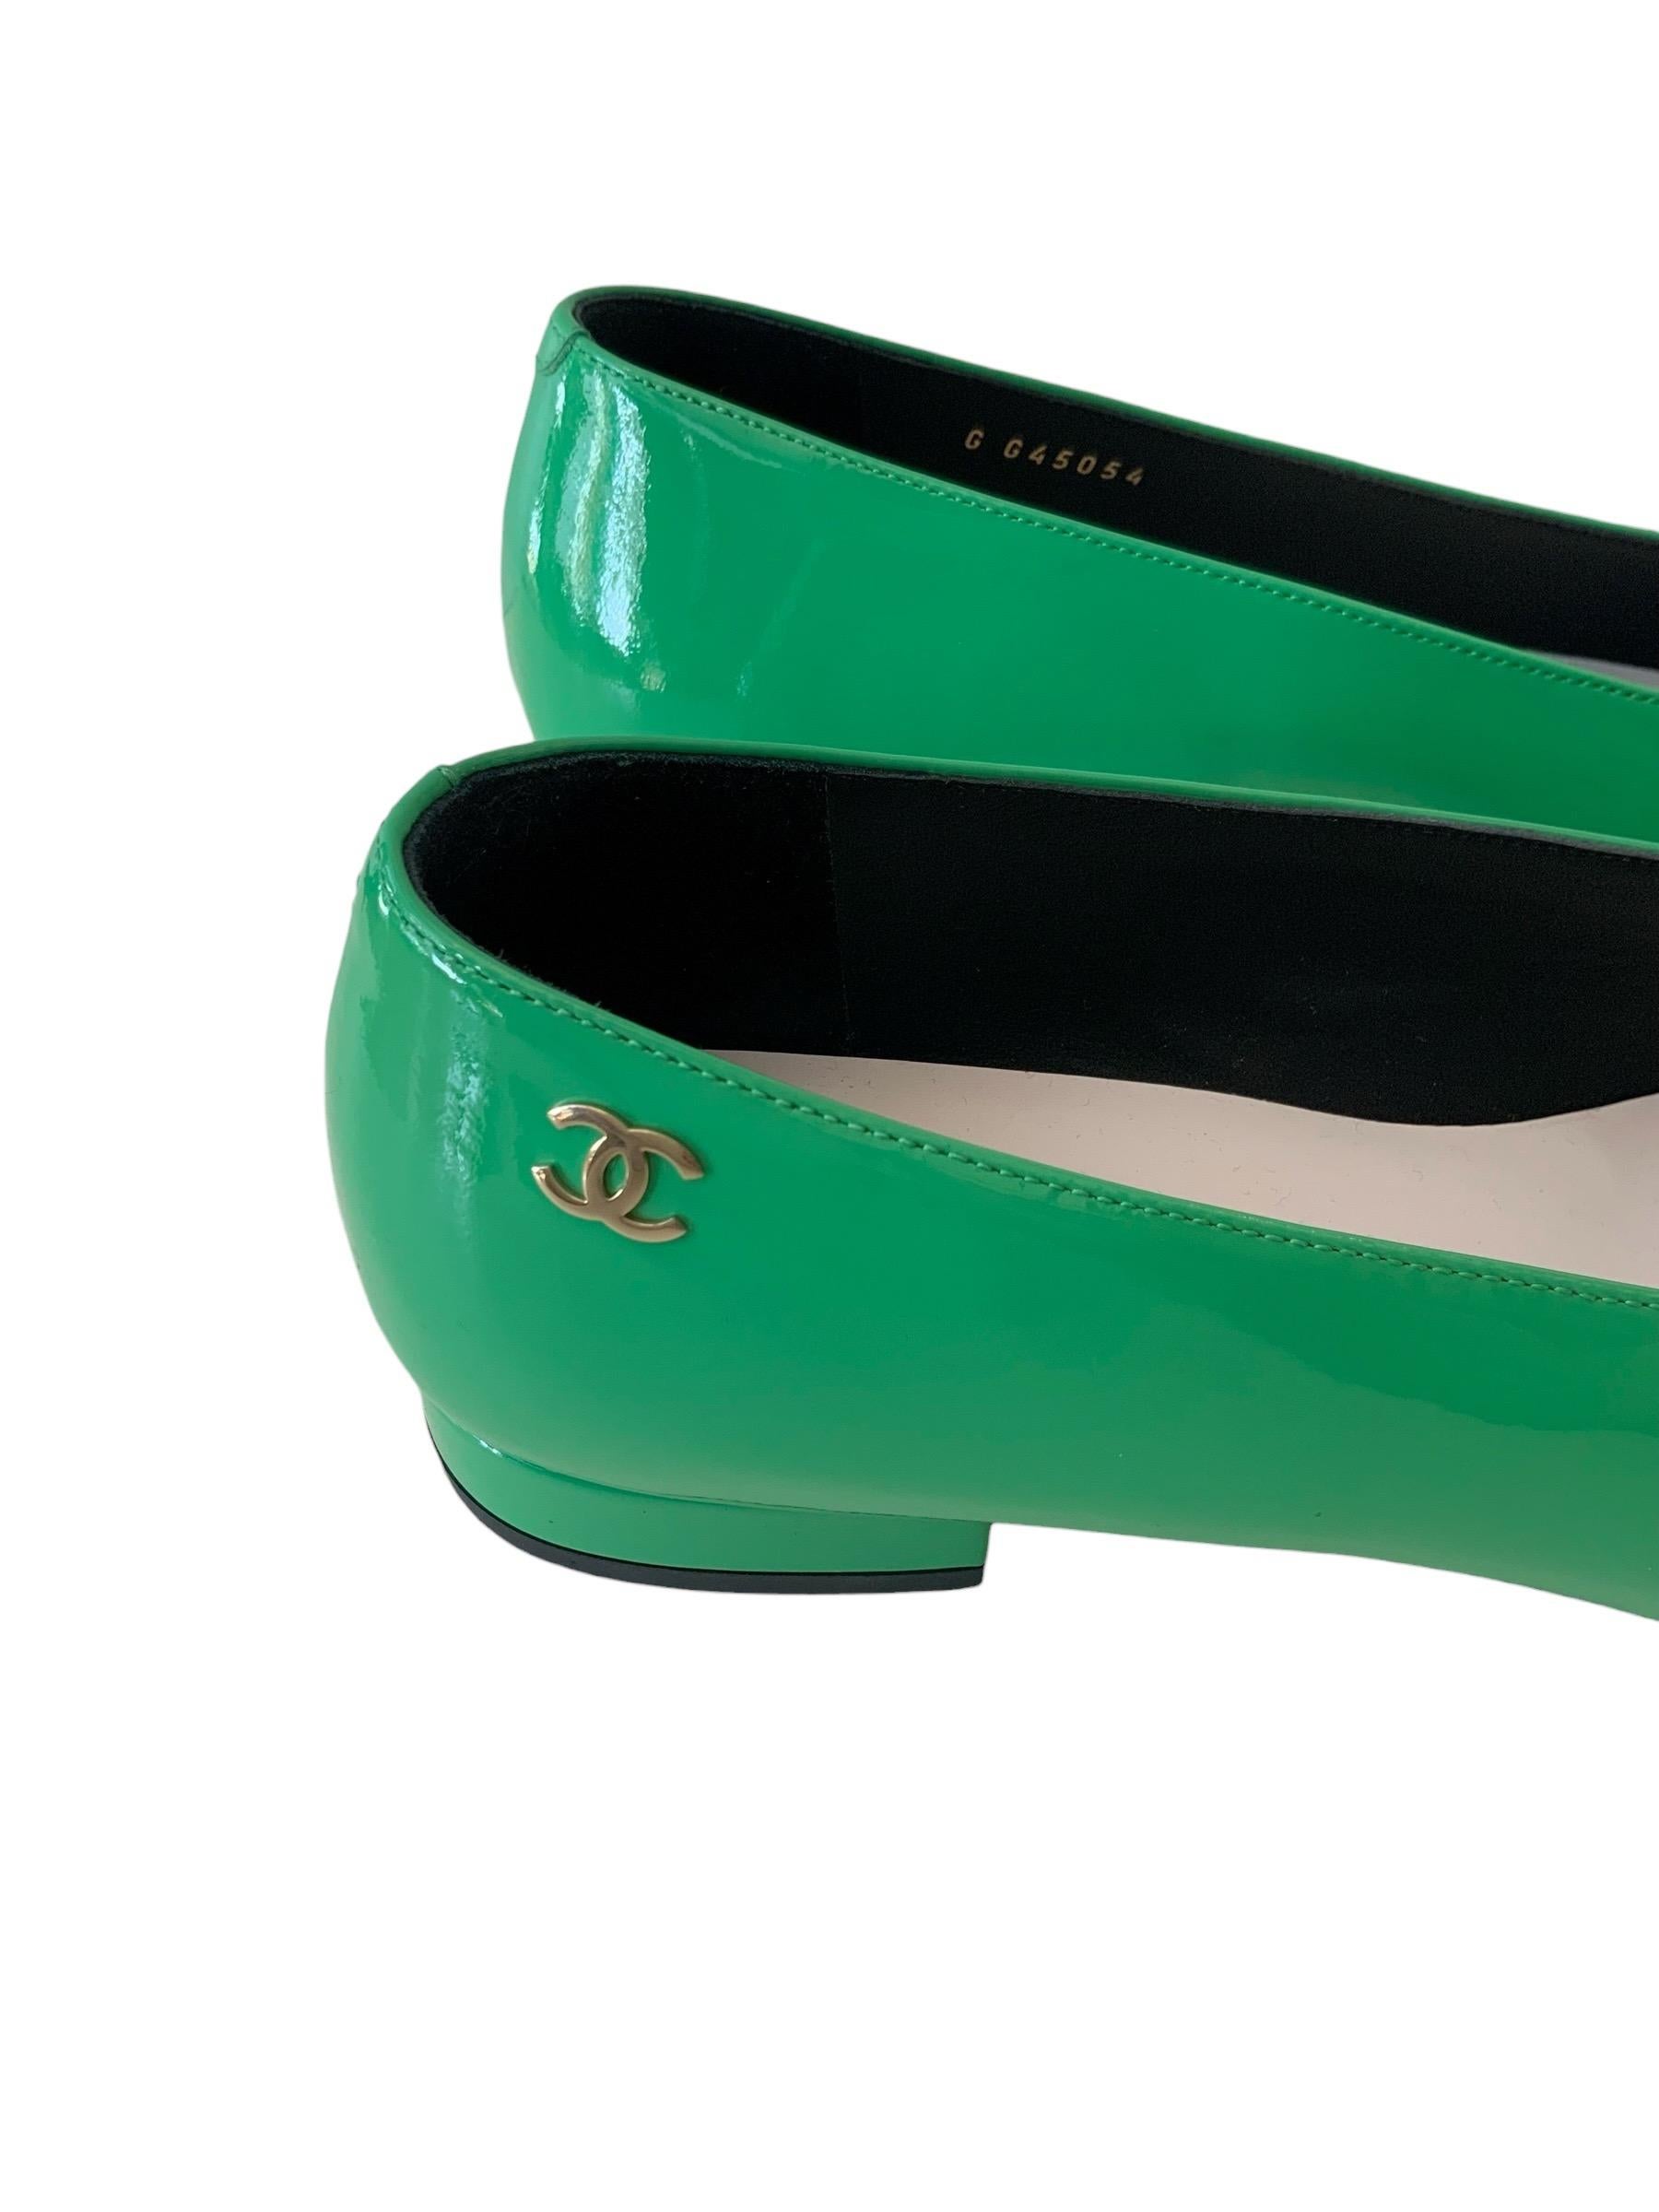 Hot green patent ballerinas with black patent cap from the house of Chanel. 
A must for this summer.....
Never worn !

Material: Patent leather
Color: Green and black
Sole: Black leather
Size: 38C
Heel: 1.9cms - approx. 0.74